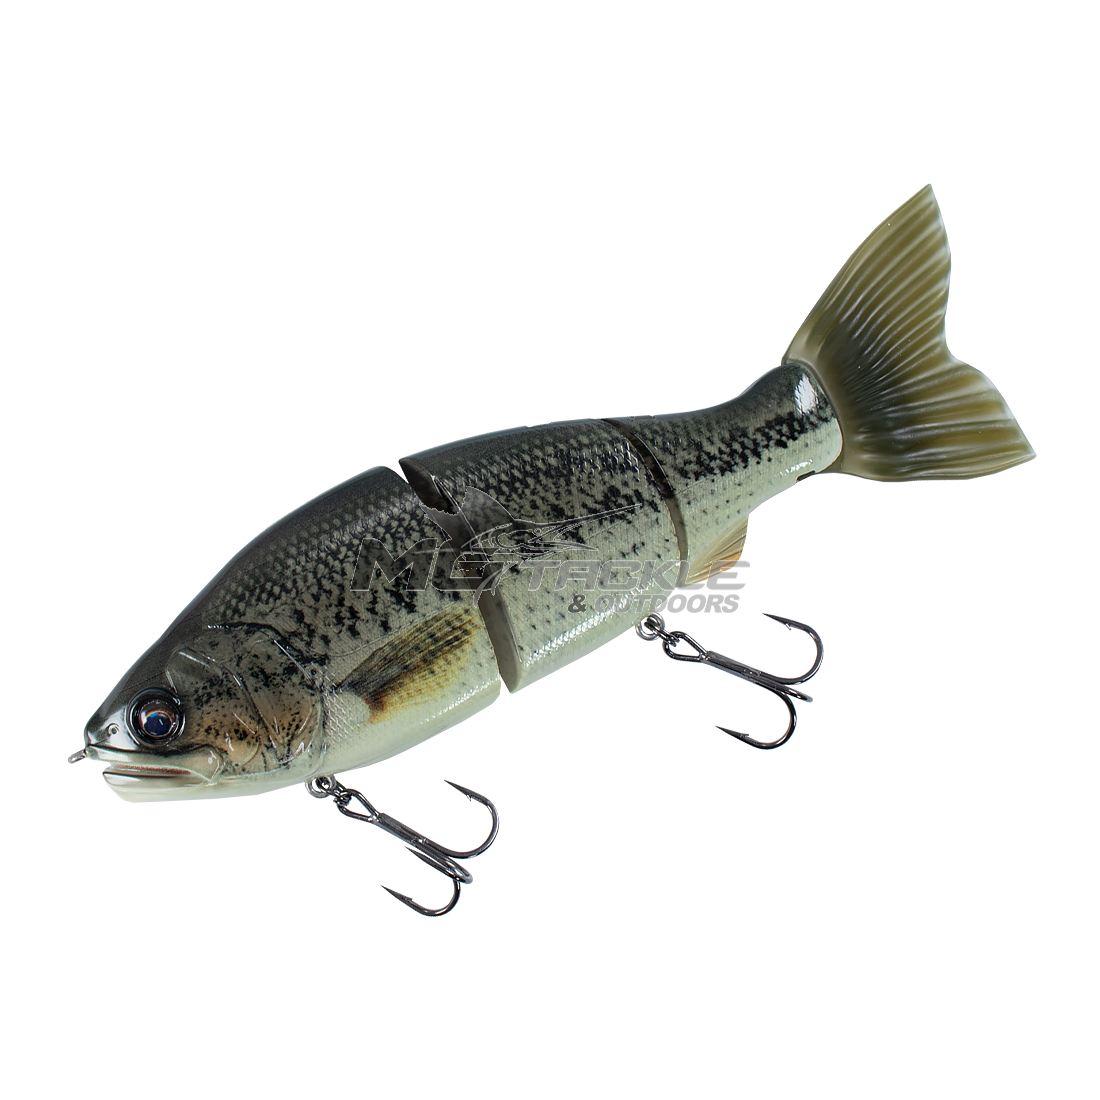 Gan Craft Jointed Claw Ratchet 184 Lure | MoTackle u0026 Outdoors